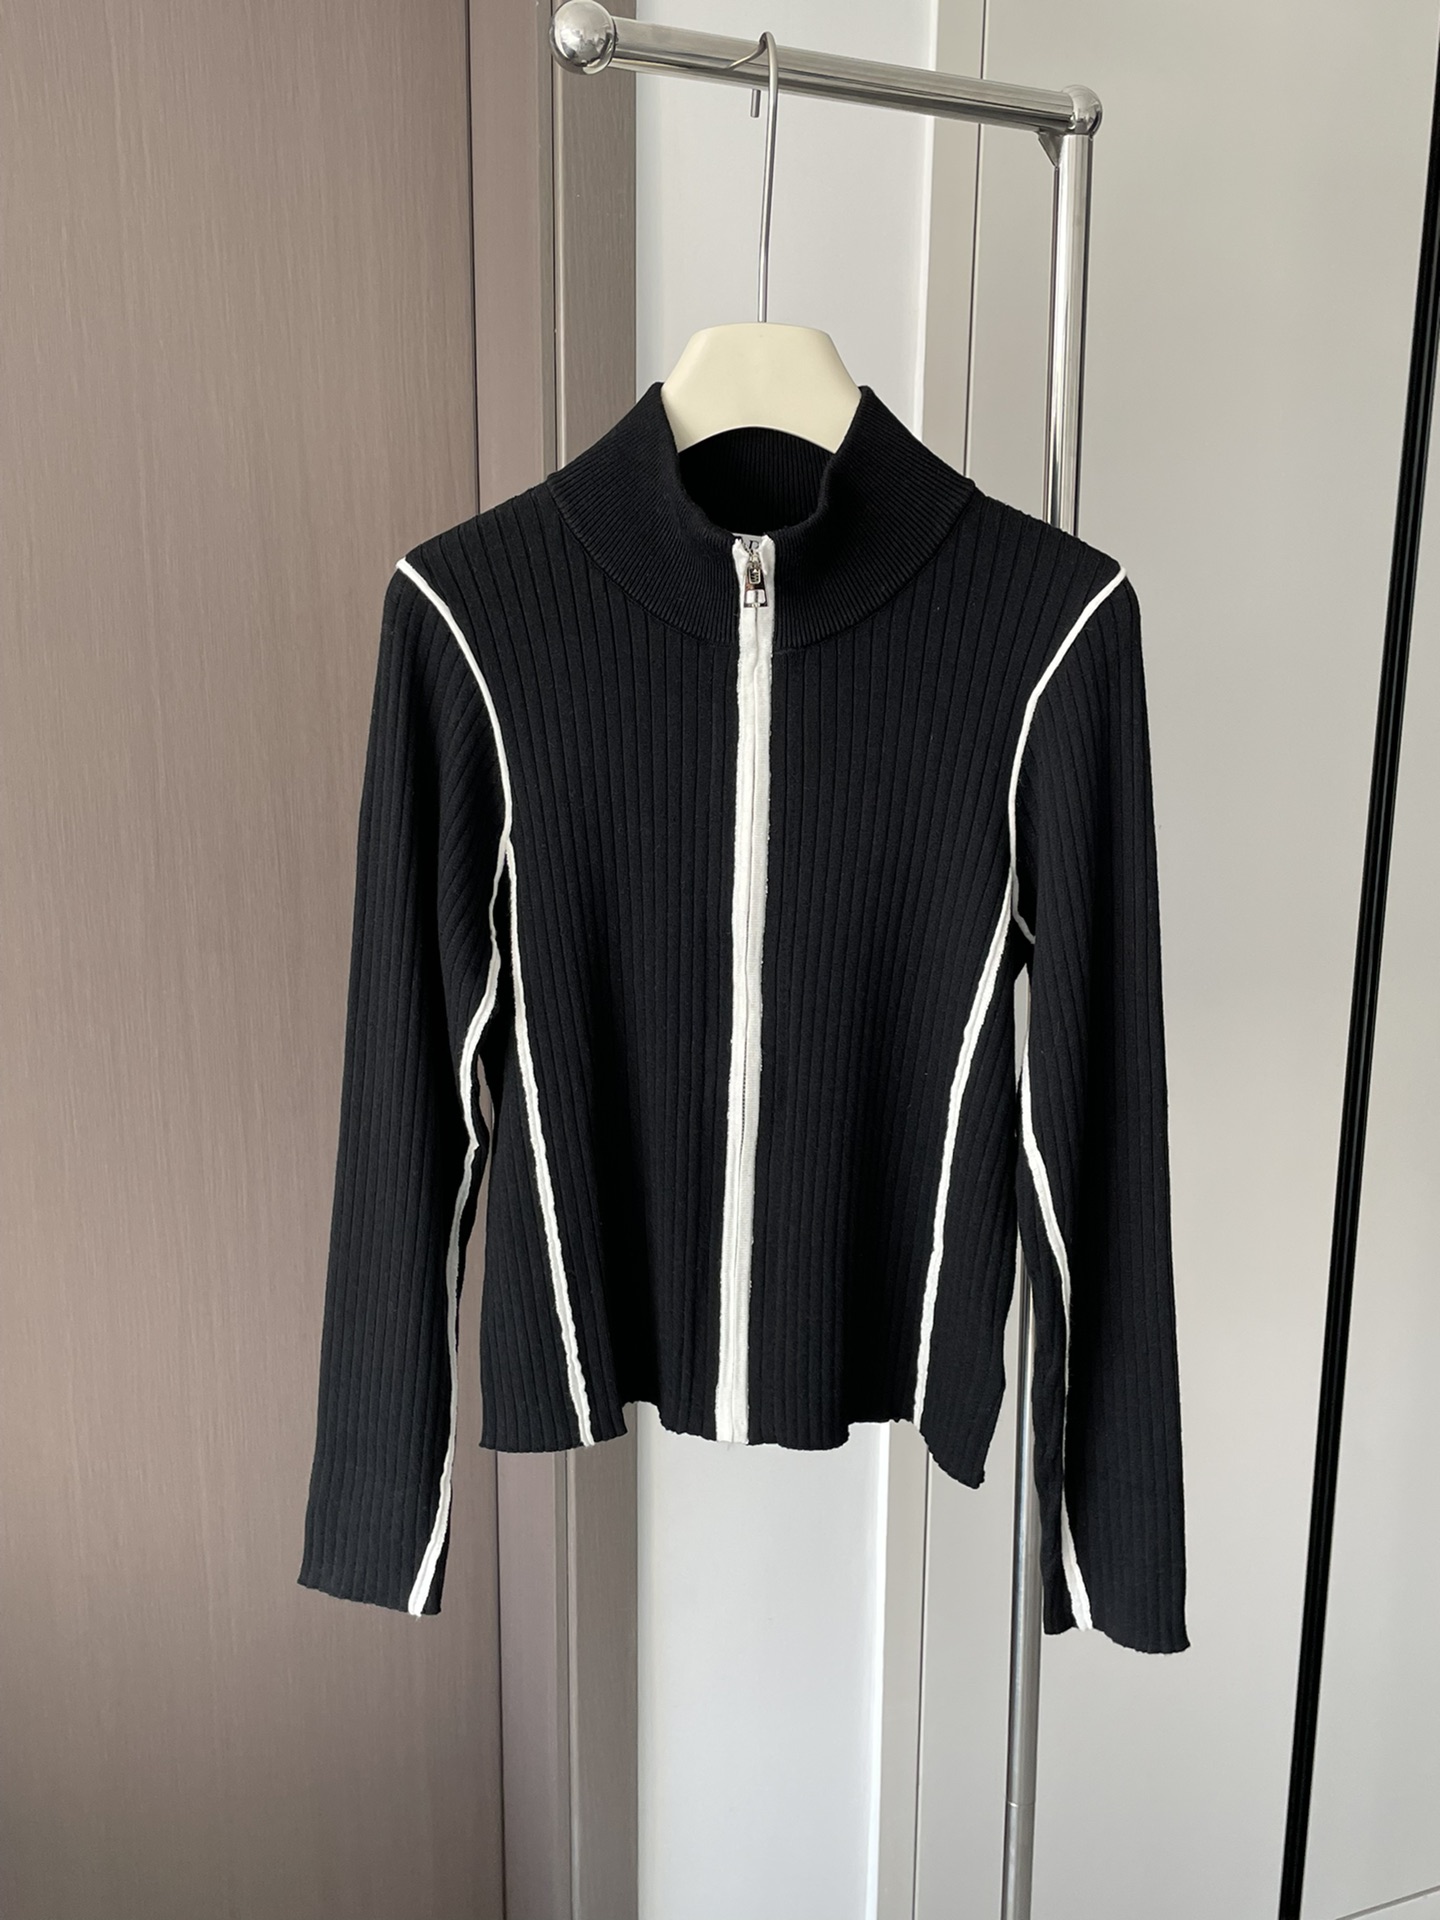 Dior Clothing Cardigans Knit Sweater Knitting Fall/Winter Collection Fashion